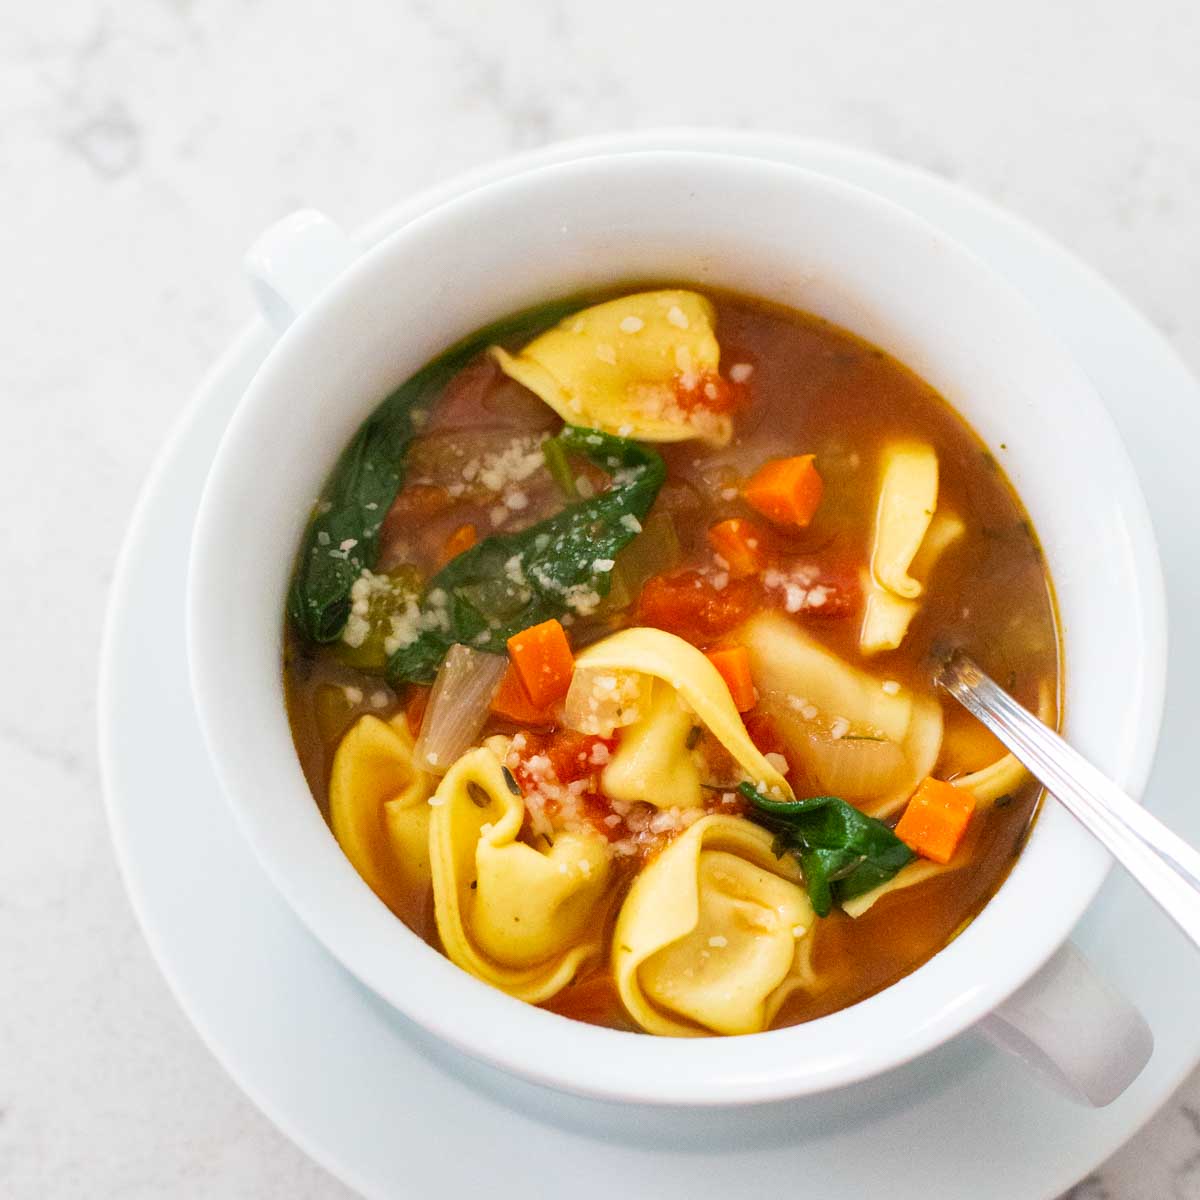 A light and healthy tortellini soup has spinach and carrots floating in the broth.